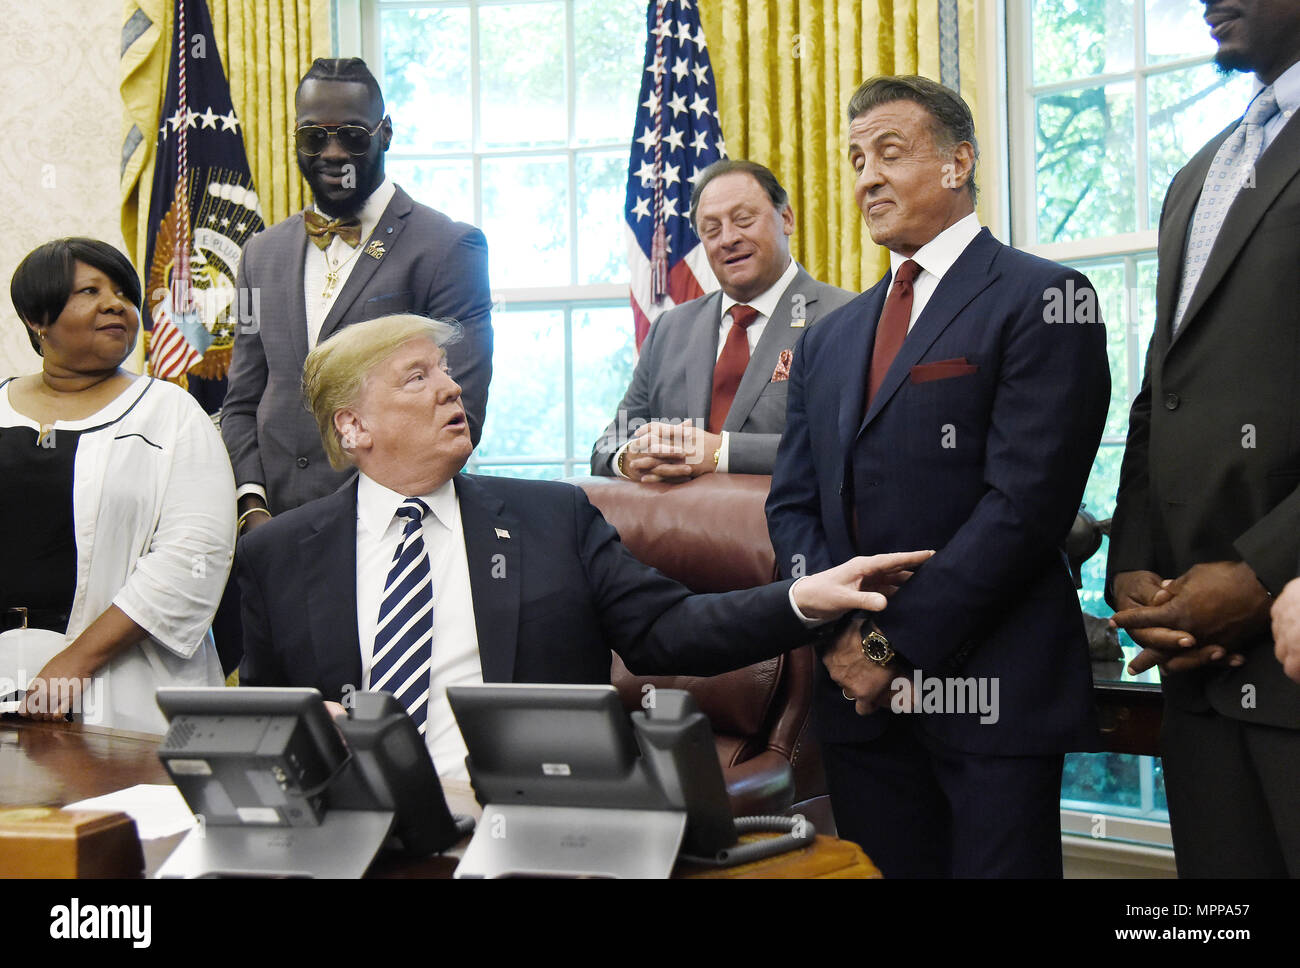 Washington, District of Columbia, USA. 24th May, 2018. United States President Donald J. Trump acknowledges actor Sylvester Stallone after signing an Executive Grant of Clemency for former heavyweight champion Jack Johnson in the Oval Office of the White House on May 24, 2018 in Washington, DC. Credit: Olivier Douliery/Pool via CNP Credit: Olivier Douliery/CNP/ZUMA Wire/Alamy Live News Stock Photo